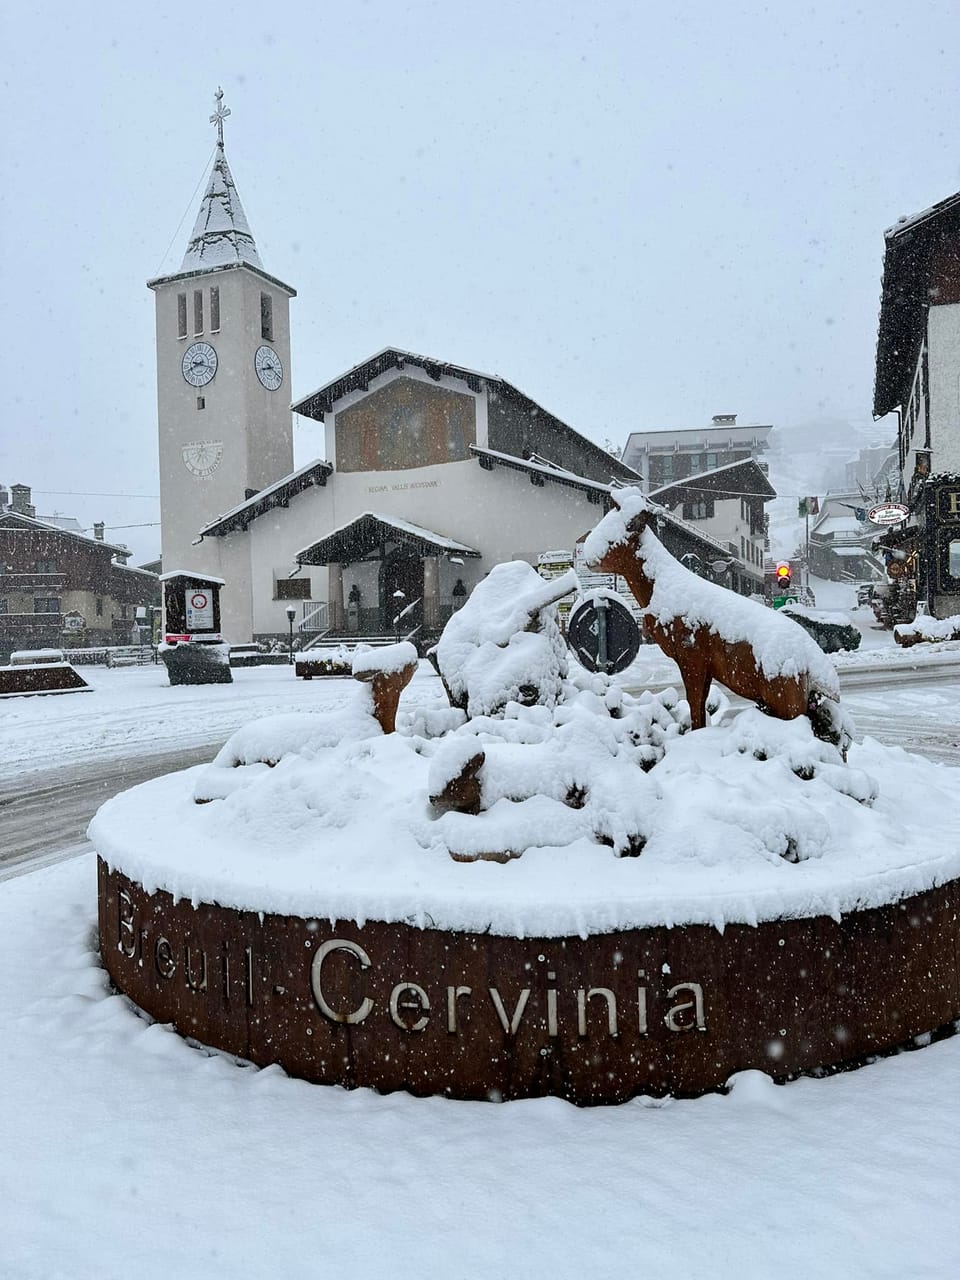 Italy's Cervinia Says It Will Offer Skiing Year-Round